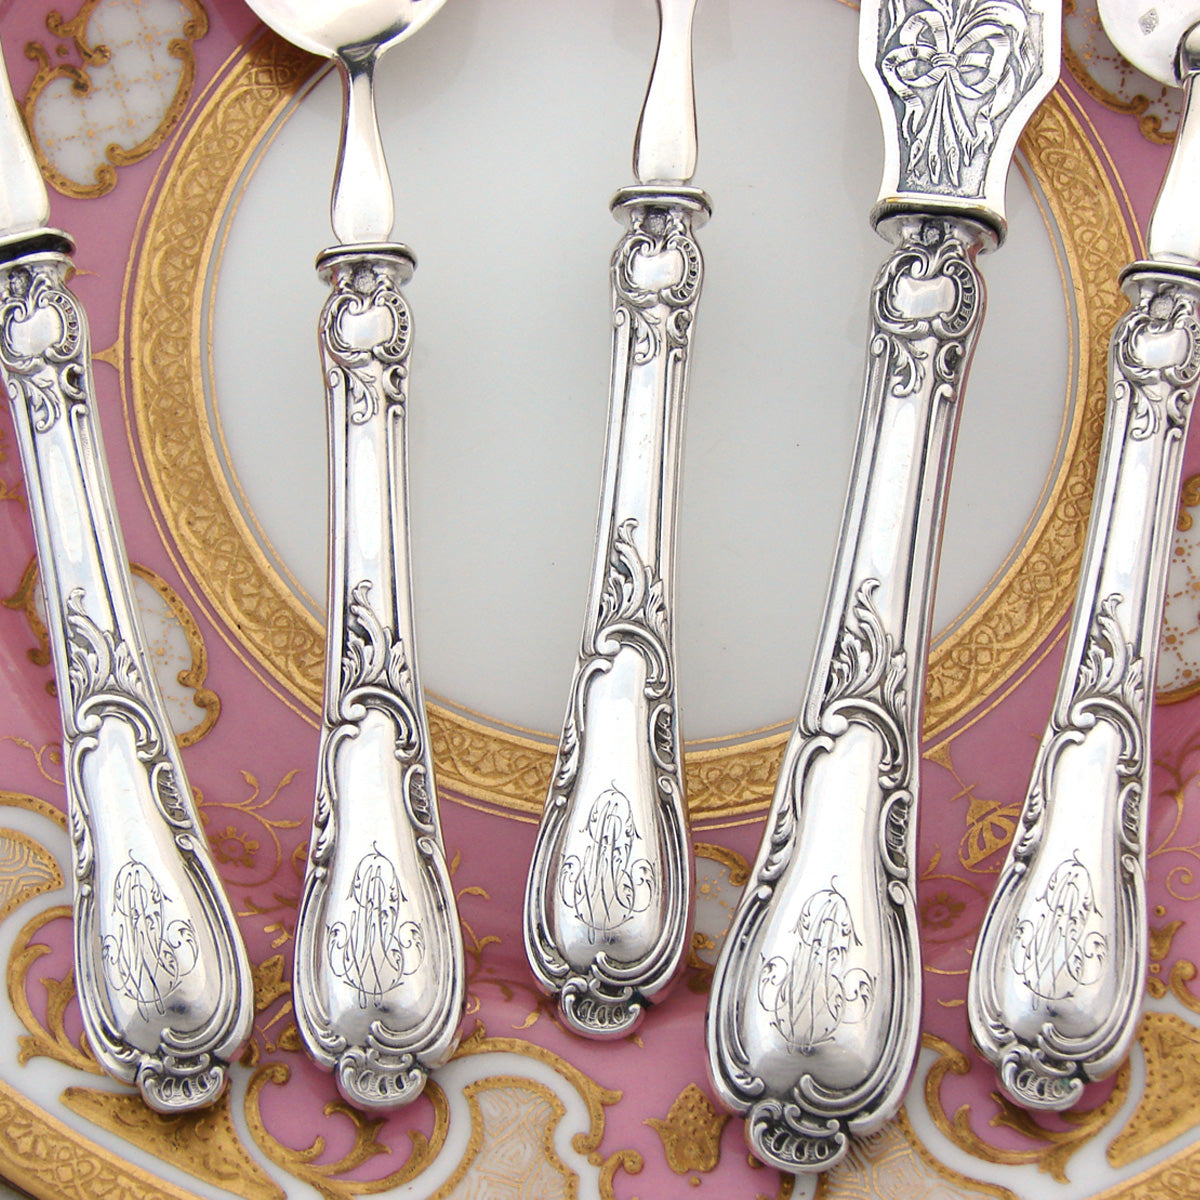 Antique French Sterling Silver 5pc Condiment or Hors d'Oeuvres Serving Set, Orig. Box